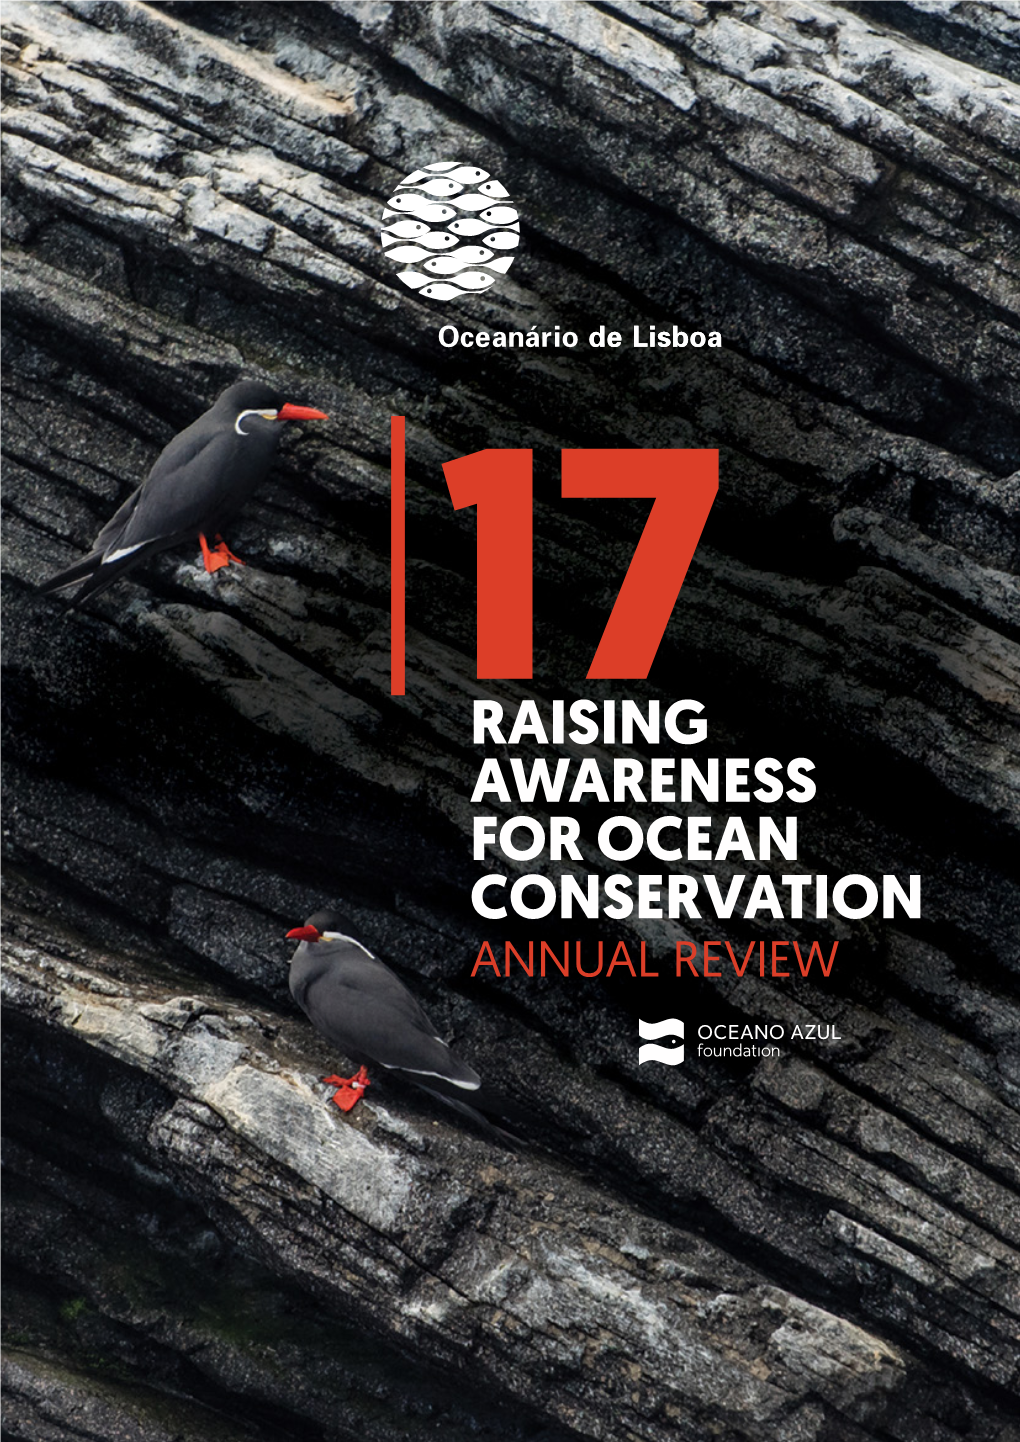 Annual Review 17Raising Awareness for Ocean Conservation | Visitors Annual Review 1 360 582 (+8%)